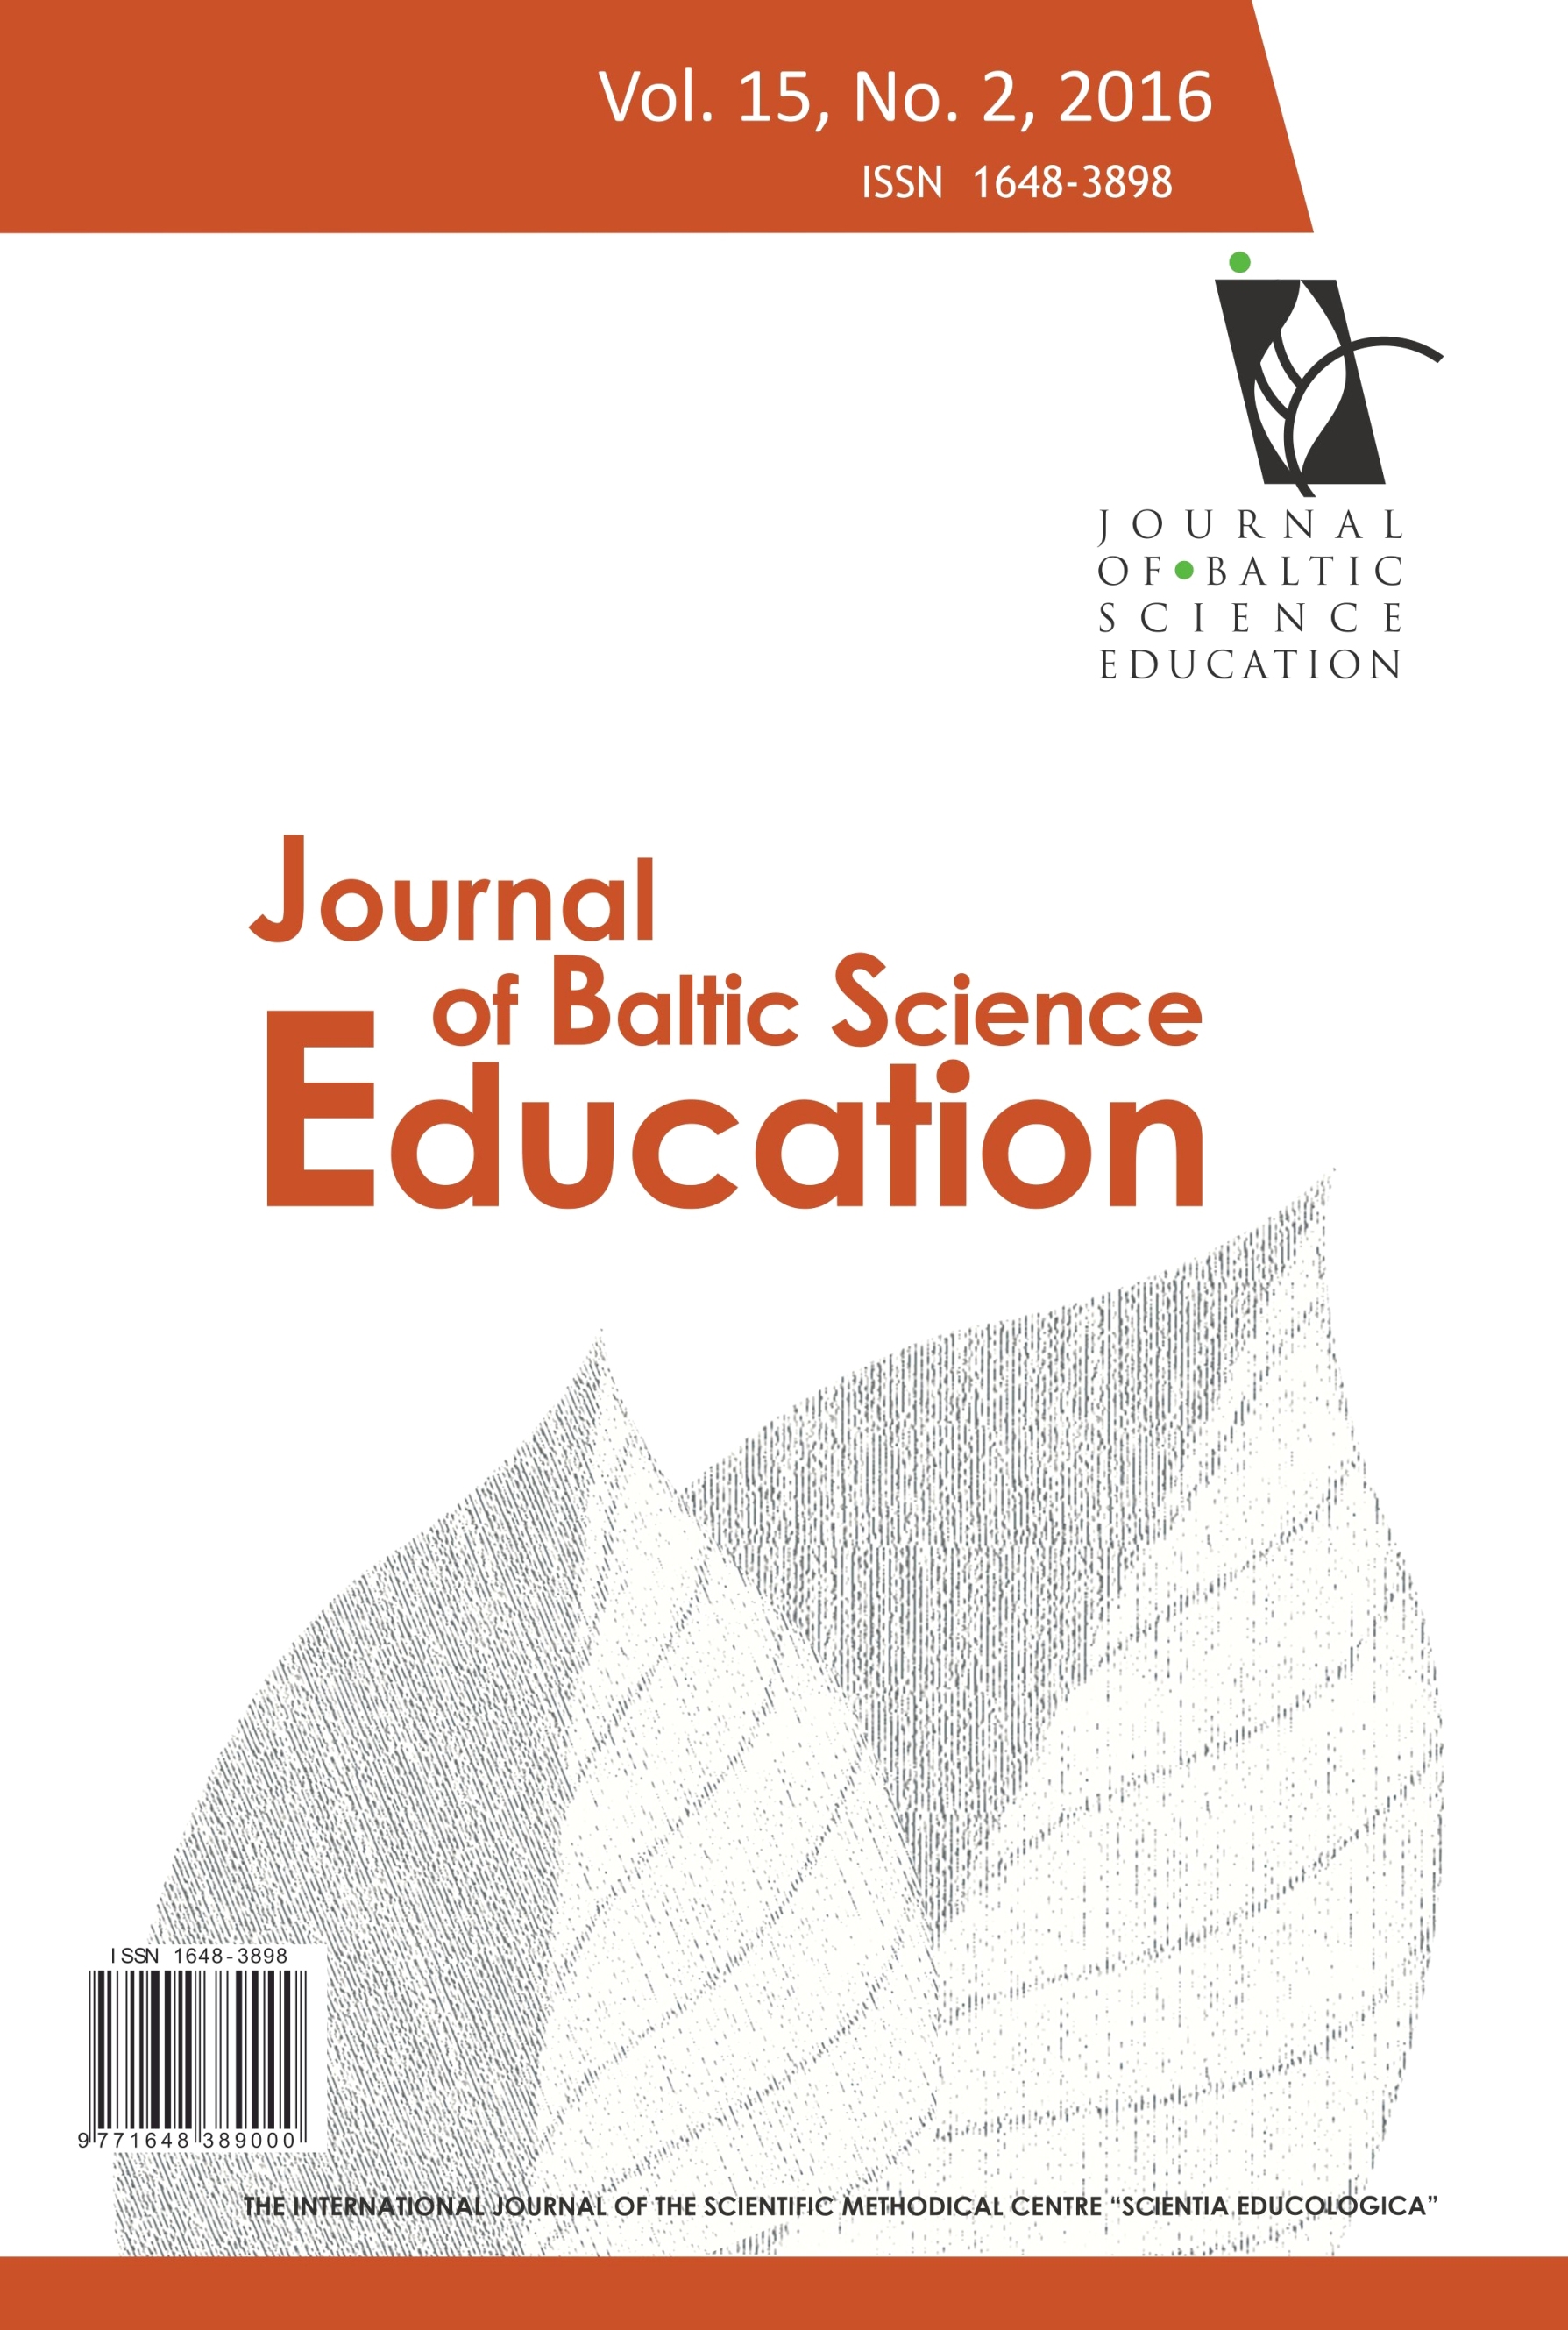 THE EFFECT OF A BLENDED COLLABORATIVE LEARNING ENVIRONMENT IN A SMALL PRIVATE ONLINE COURSE (SPOC): A COMPARISON WITH A LECTURE COURSE Cover Image